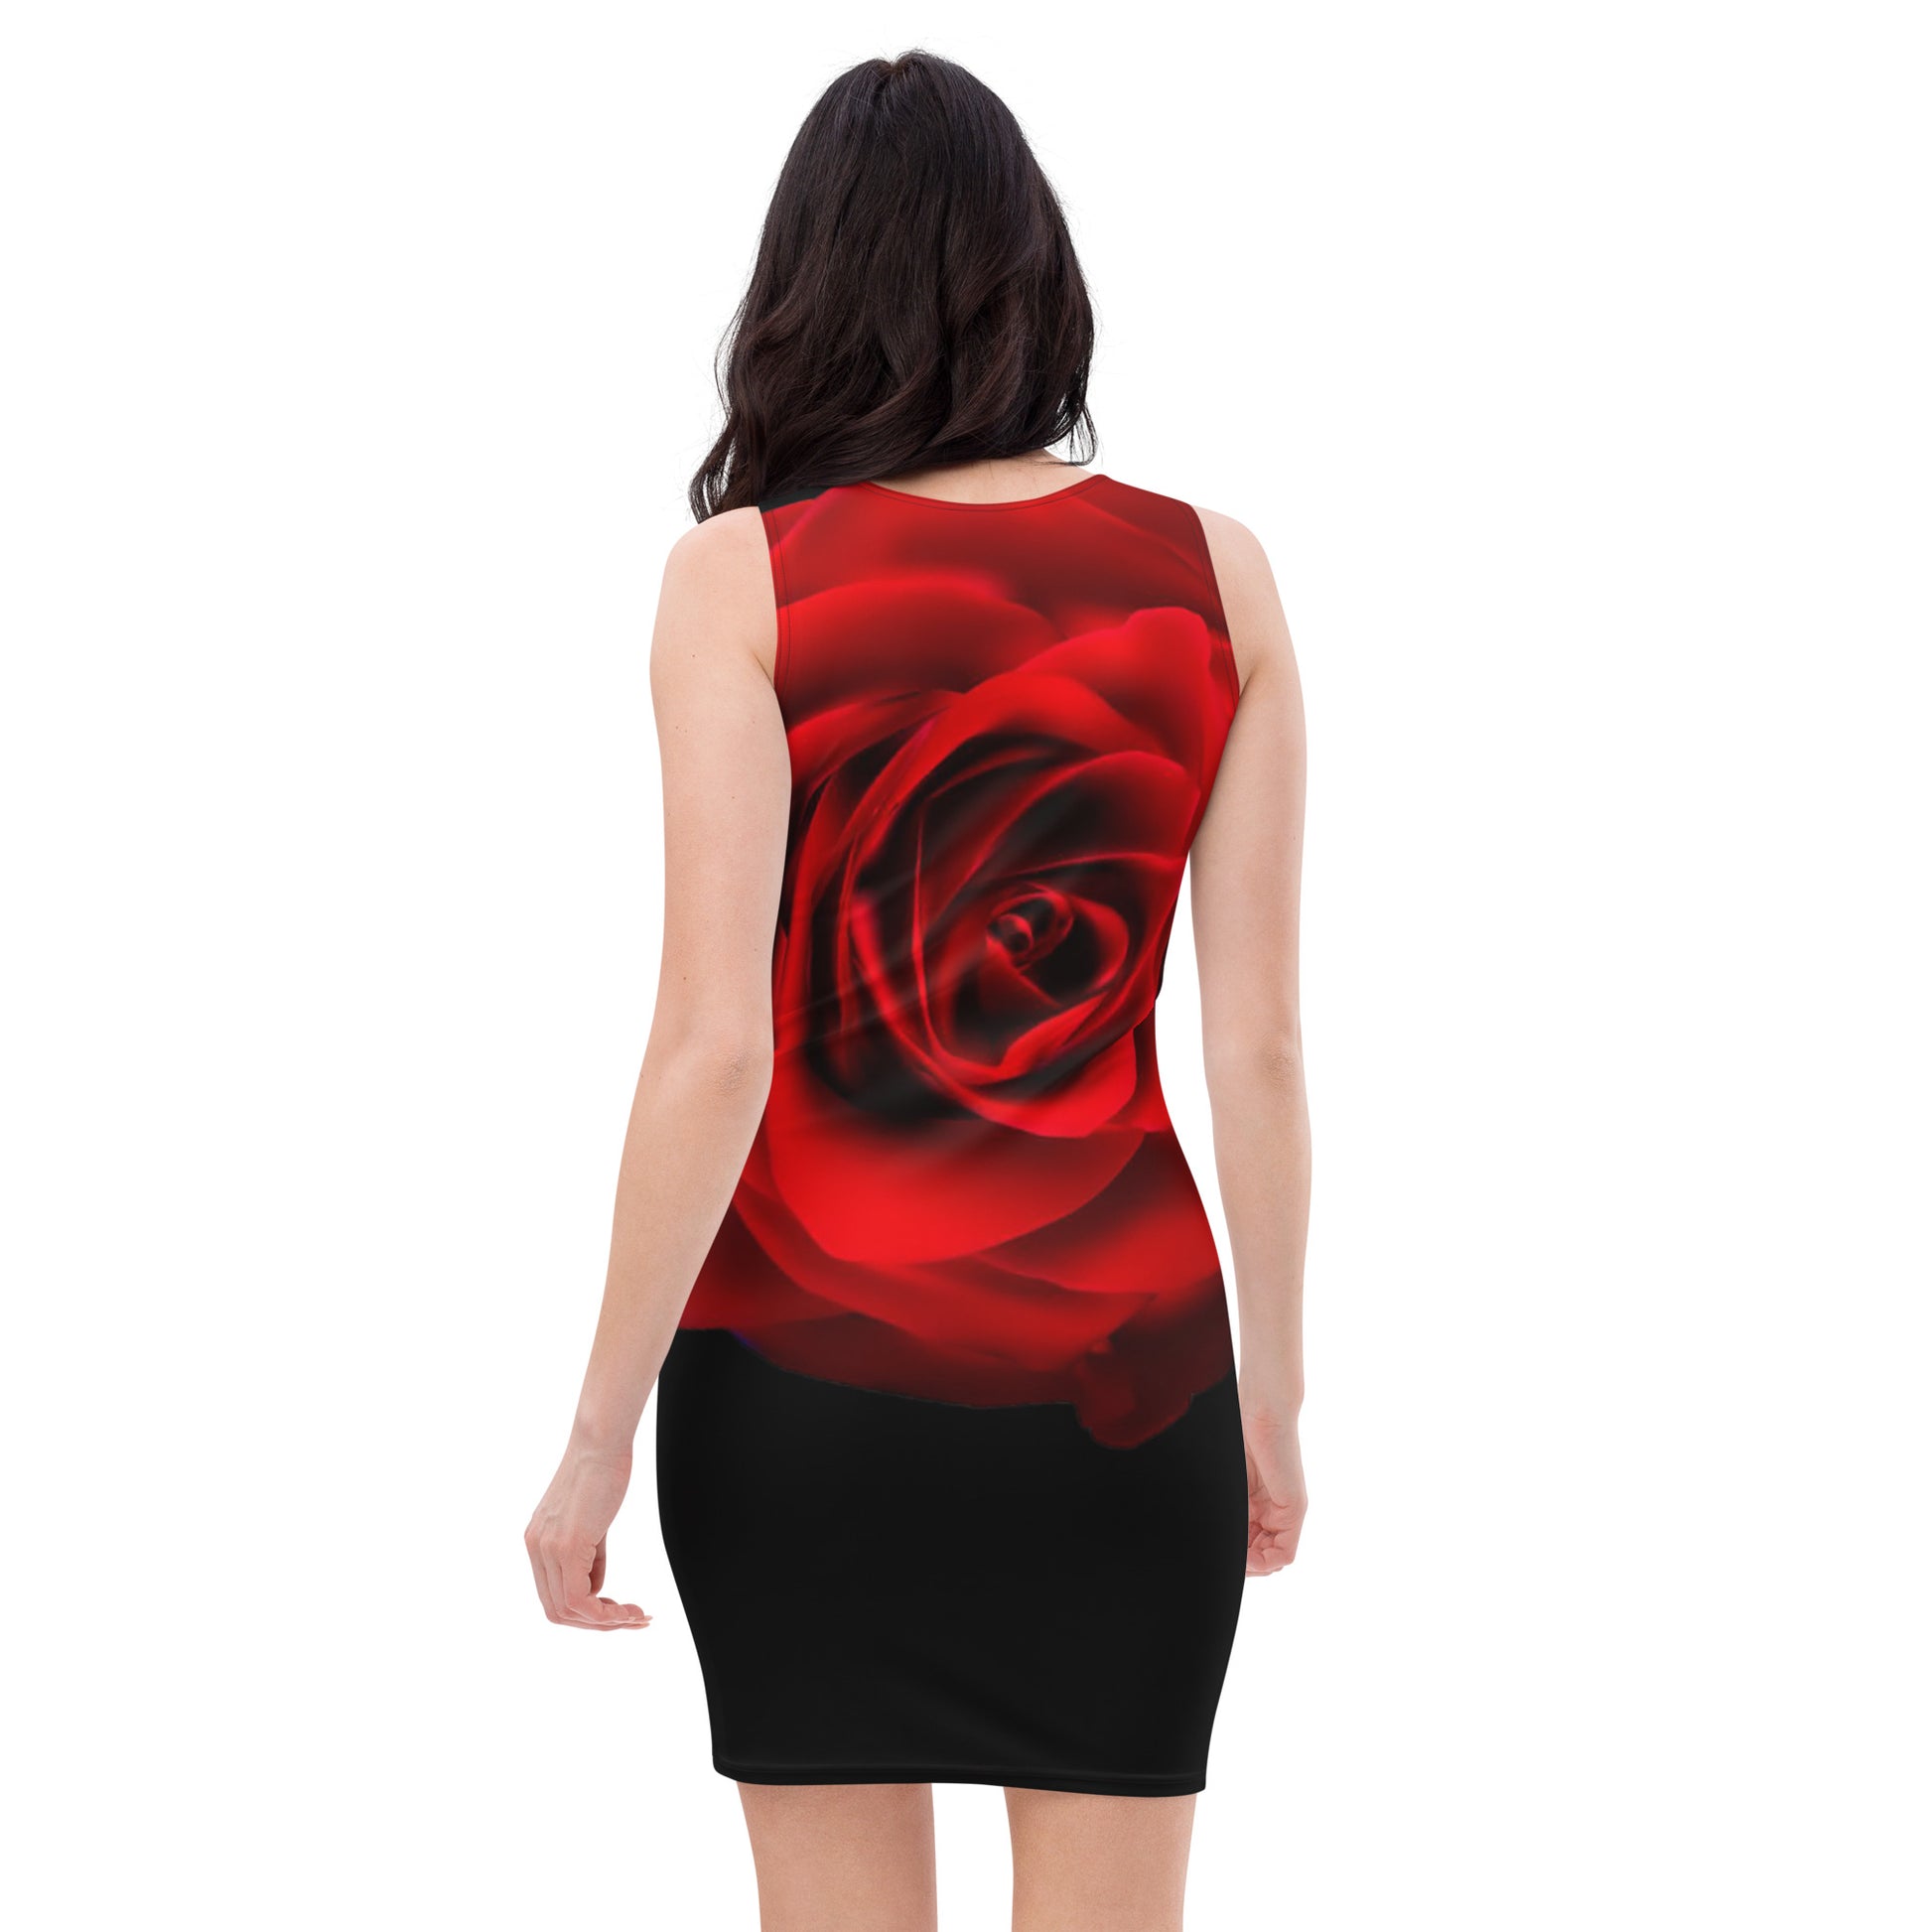 Emote Merch from SpotlYght Seeker - Bravo and Roses Bodycon Dress for the Female Artist because artists deserve praise.